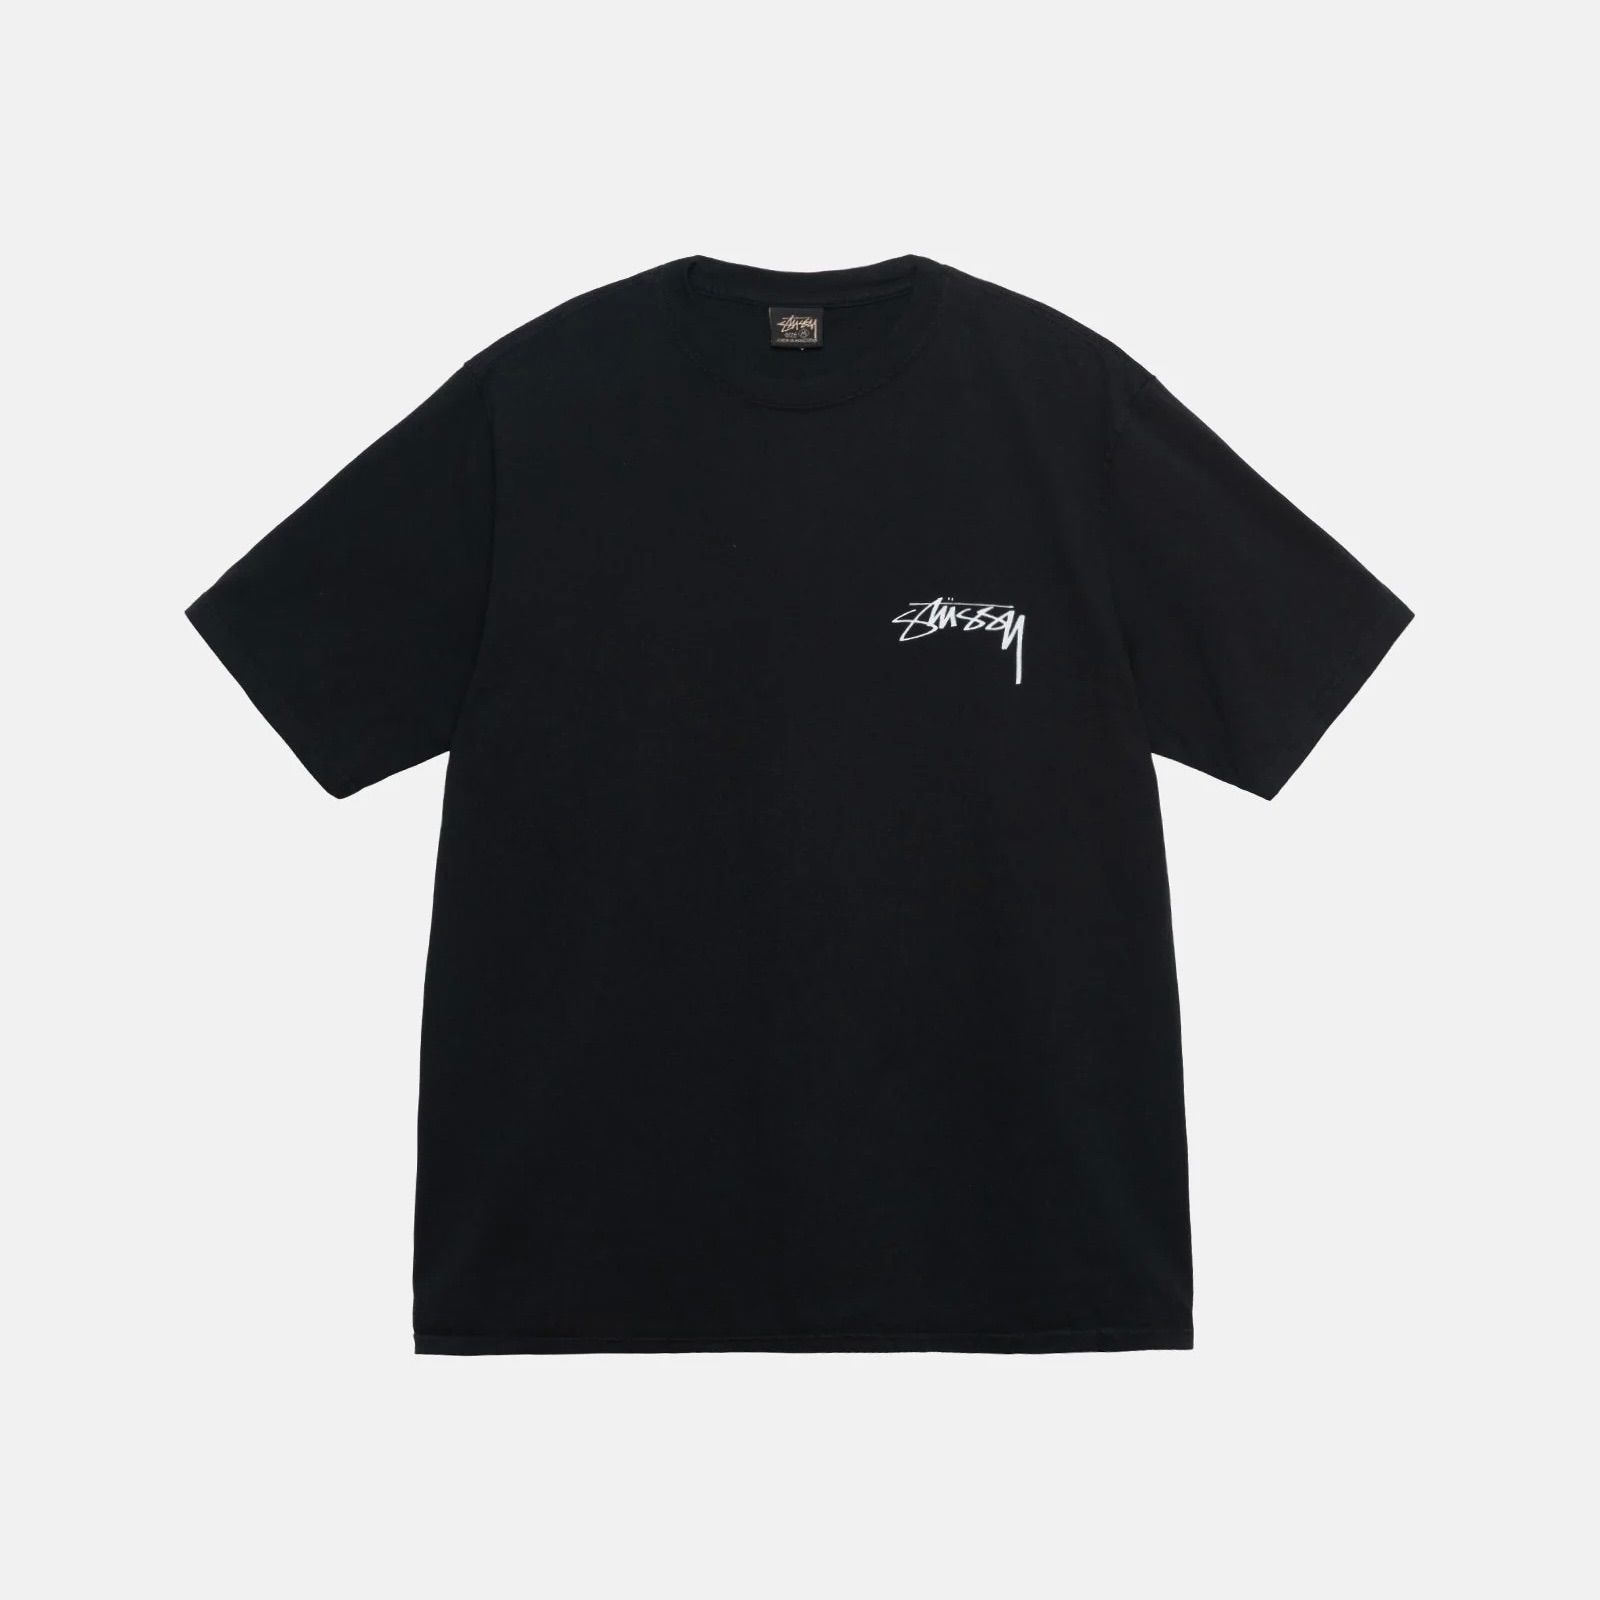 Stussy x Our Legacy Dot Pigment Dyed Teeステューシー コラボTシャツ ...